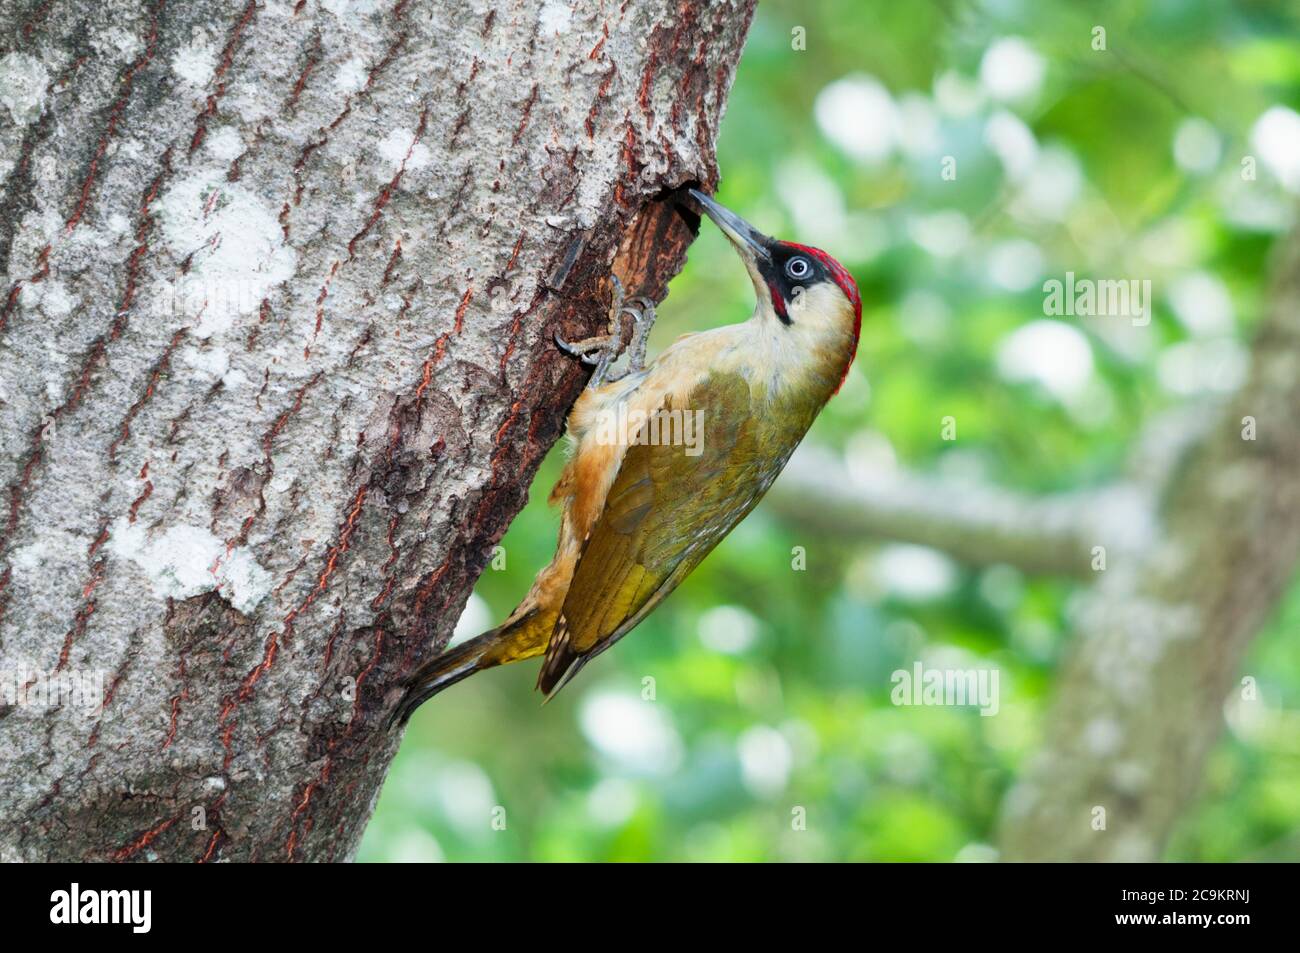 A male green woodpecker at the entrance of its nest in a hole in a tree Stock Photo